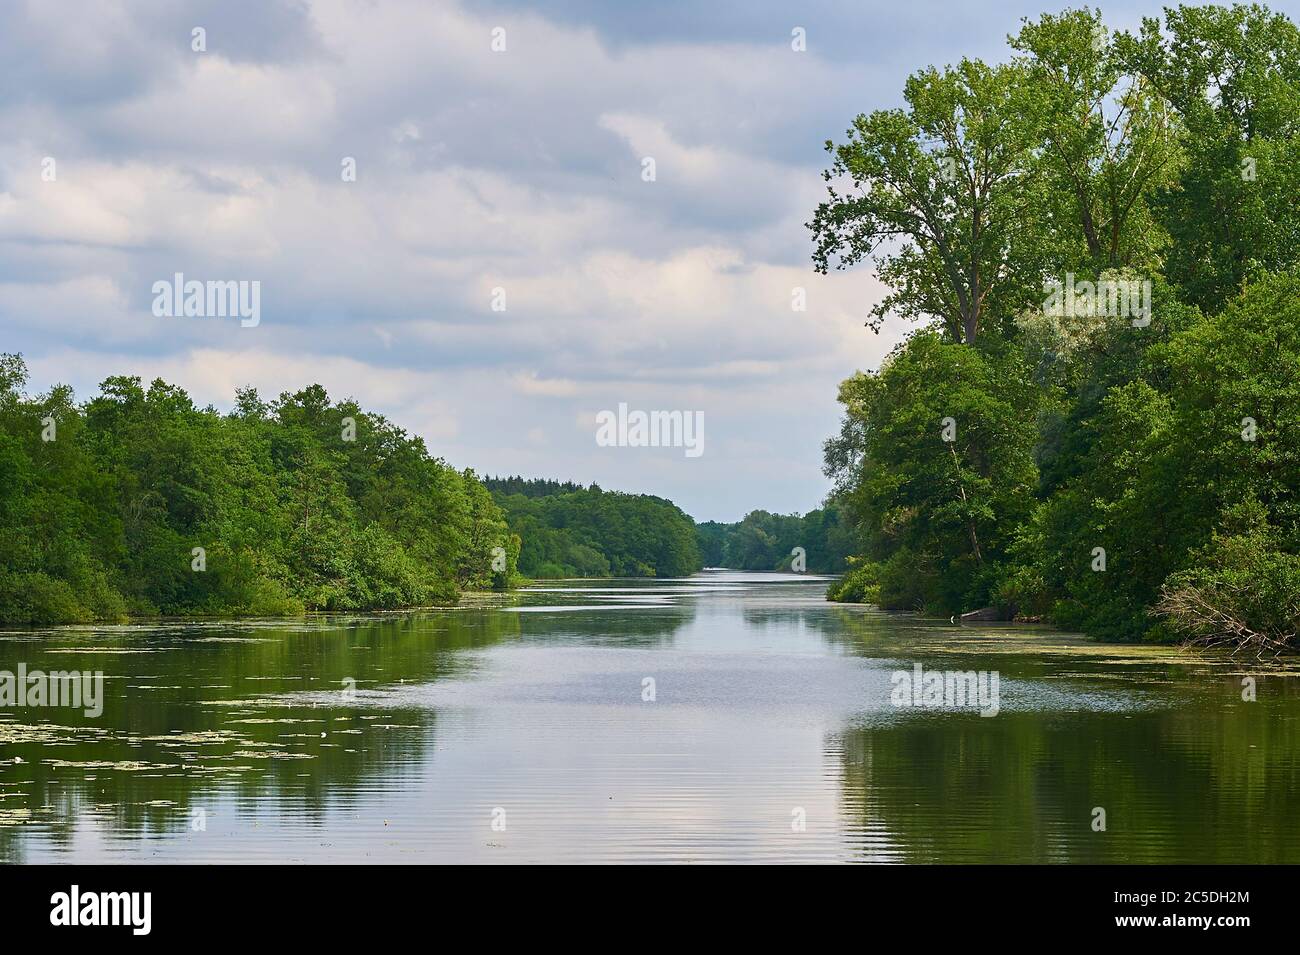 The Wakenitz river, also called the Amazon of the North, meanders from Lake Ratzeburg to Lübeck in Northern Germany Stock Photo